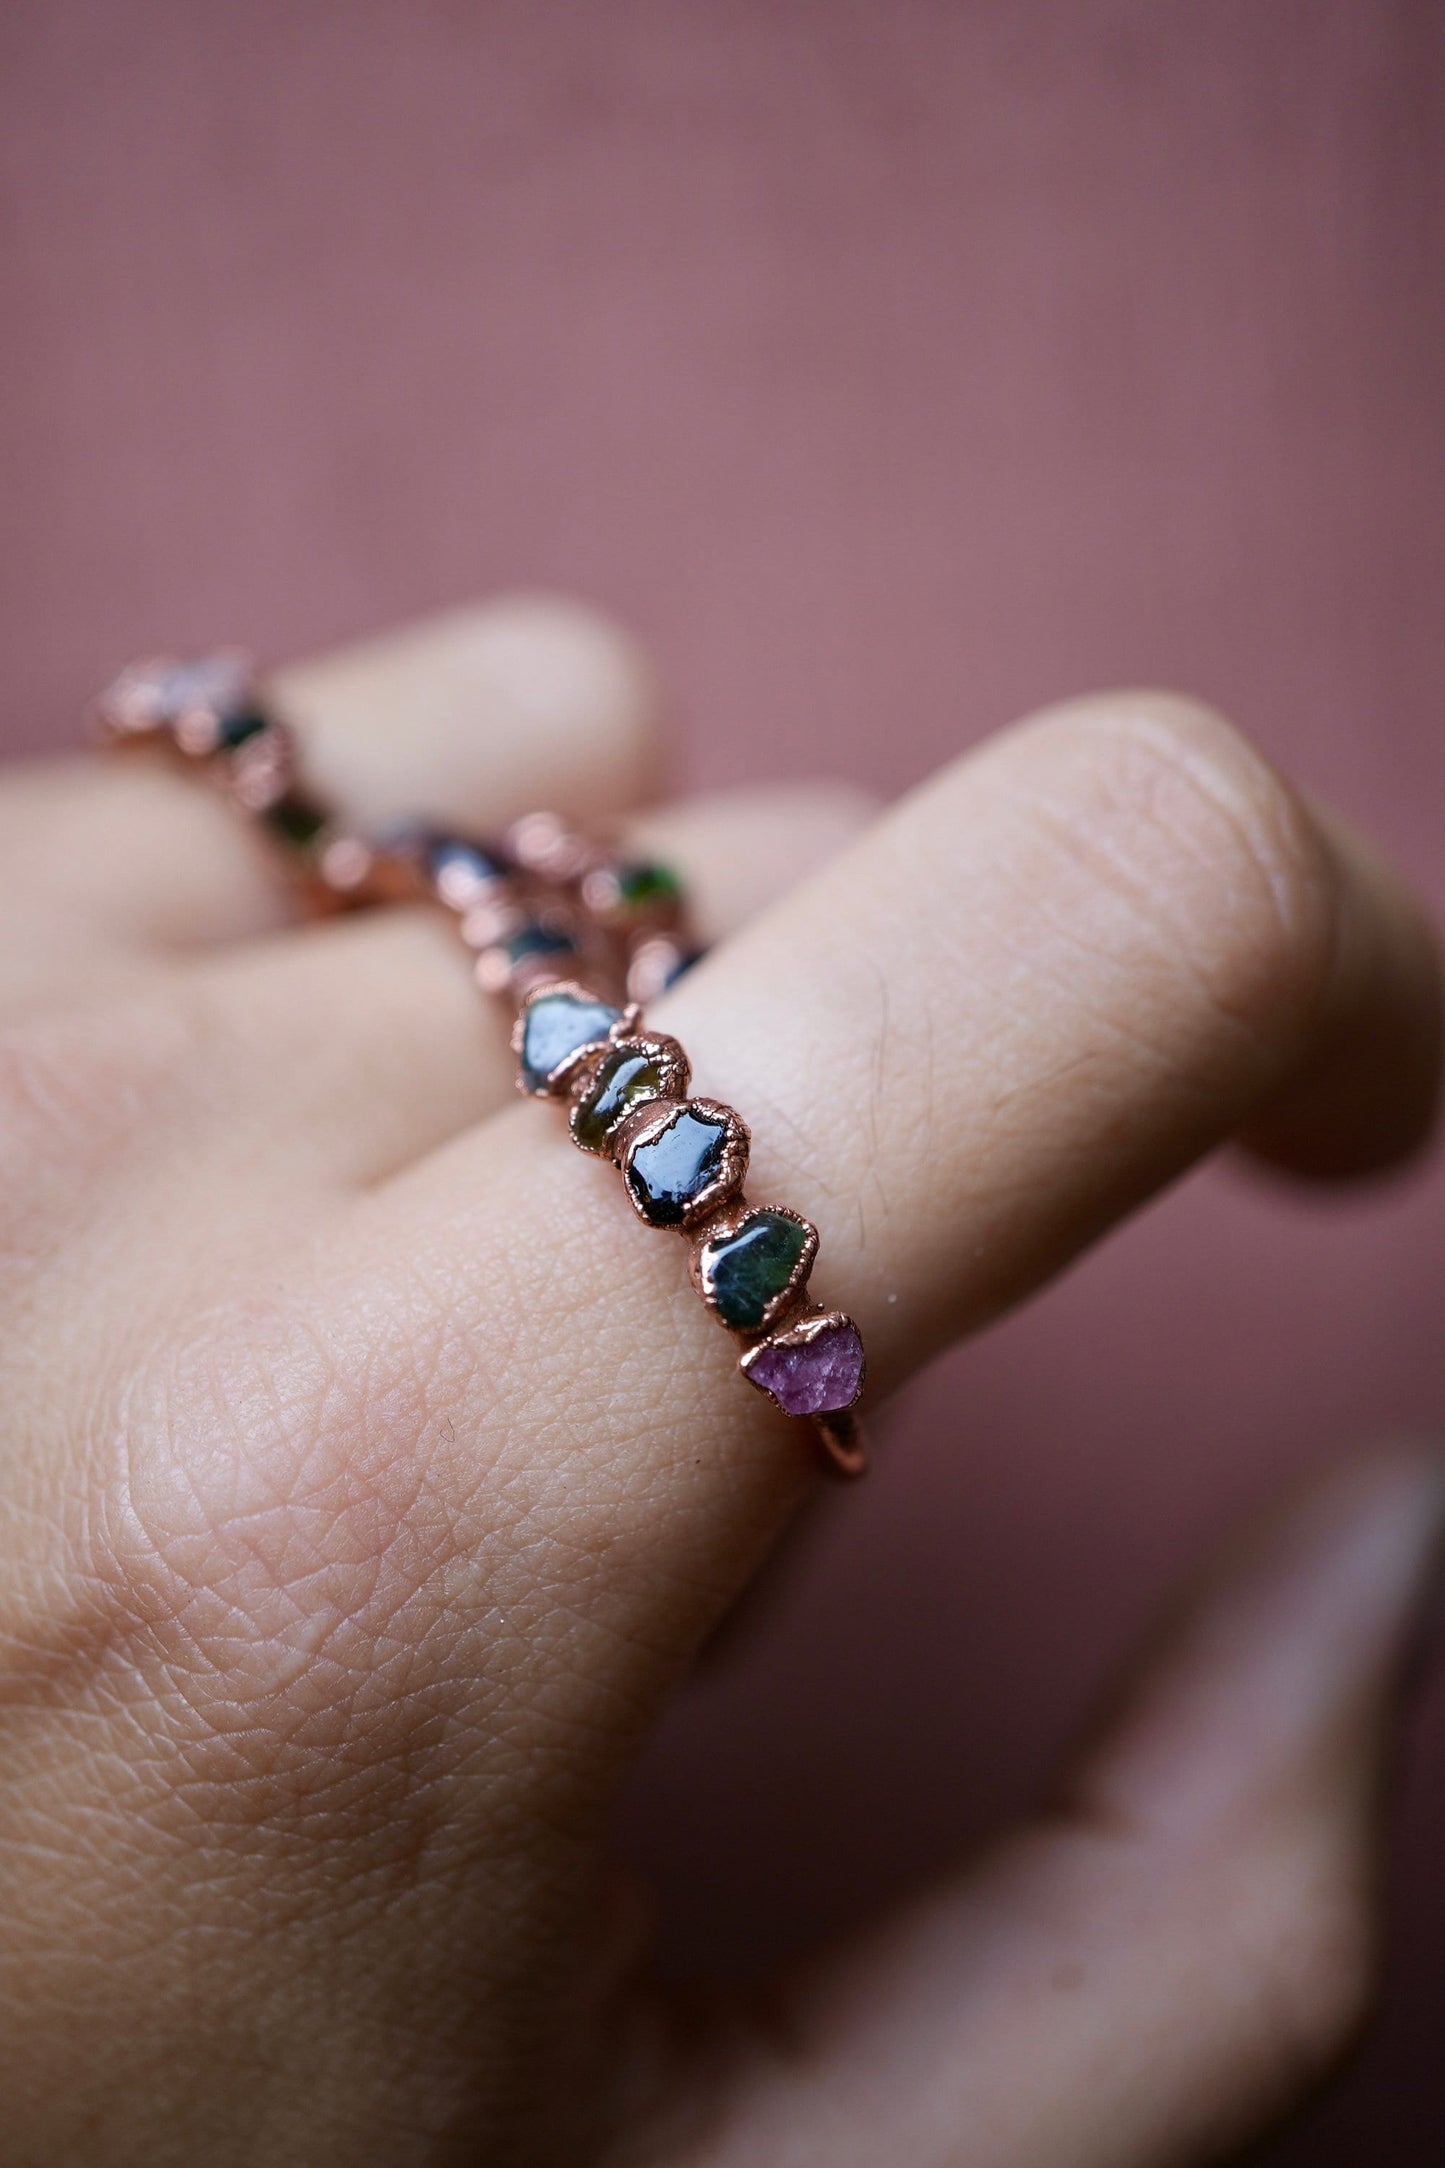 Multi-Colored Tourmaline Ring || Copper Tourmaline Ring || Pink Tourmaline || Green Tourmaline || Black Tourmaline || Electroformed Ring